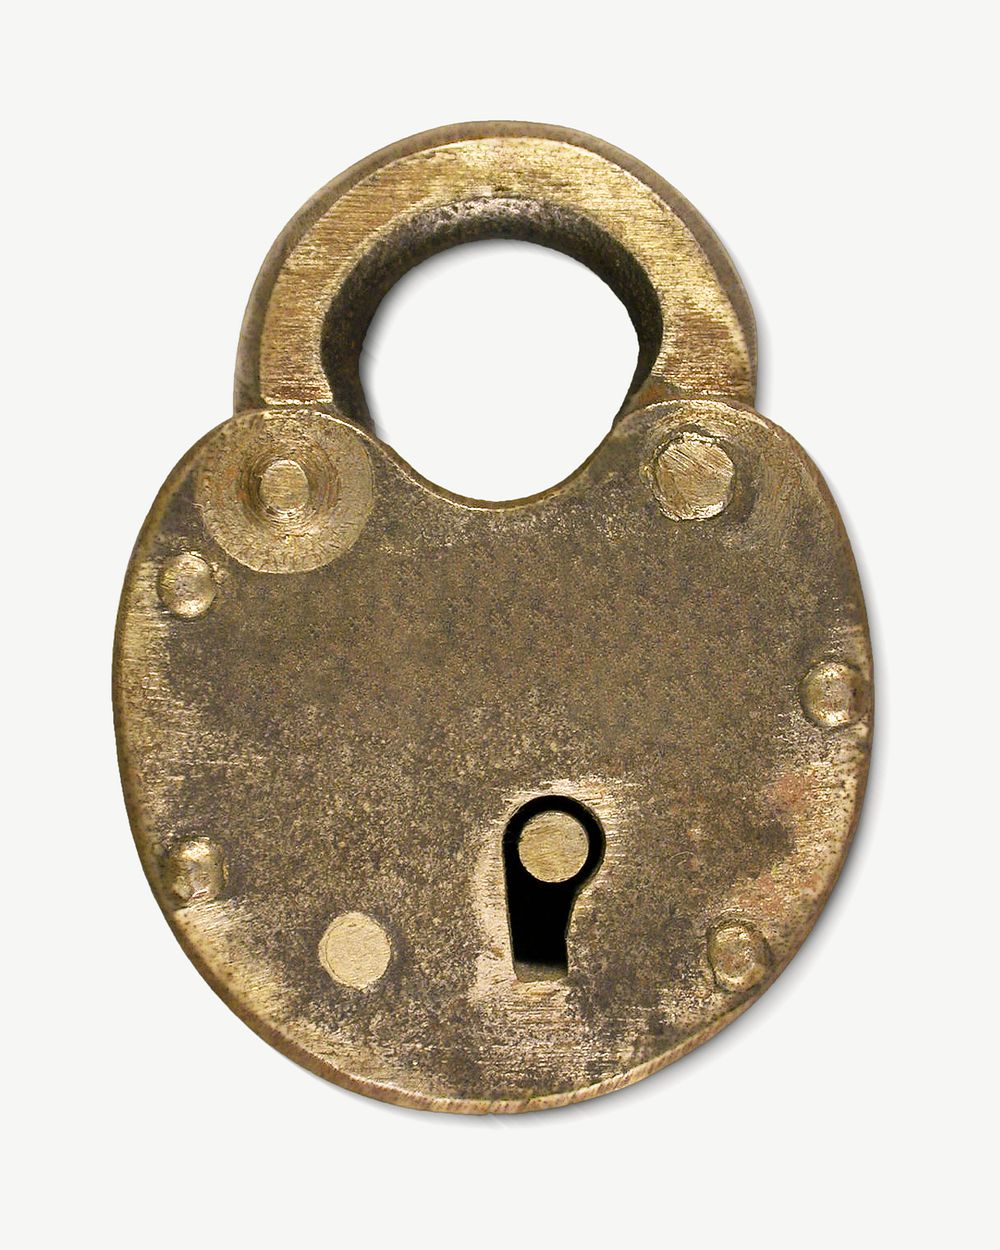 Vintage padlock, old object psd designed by H. C. Jones. Remixed by rawpixel.